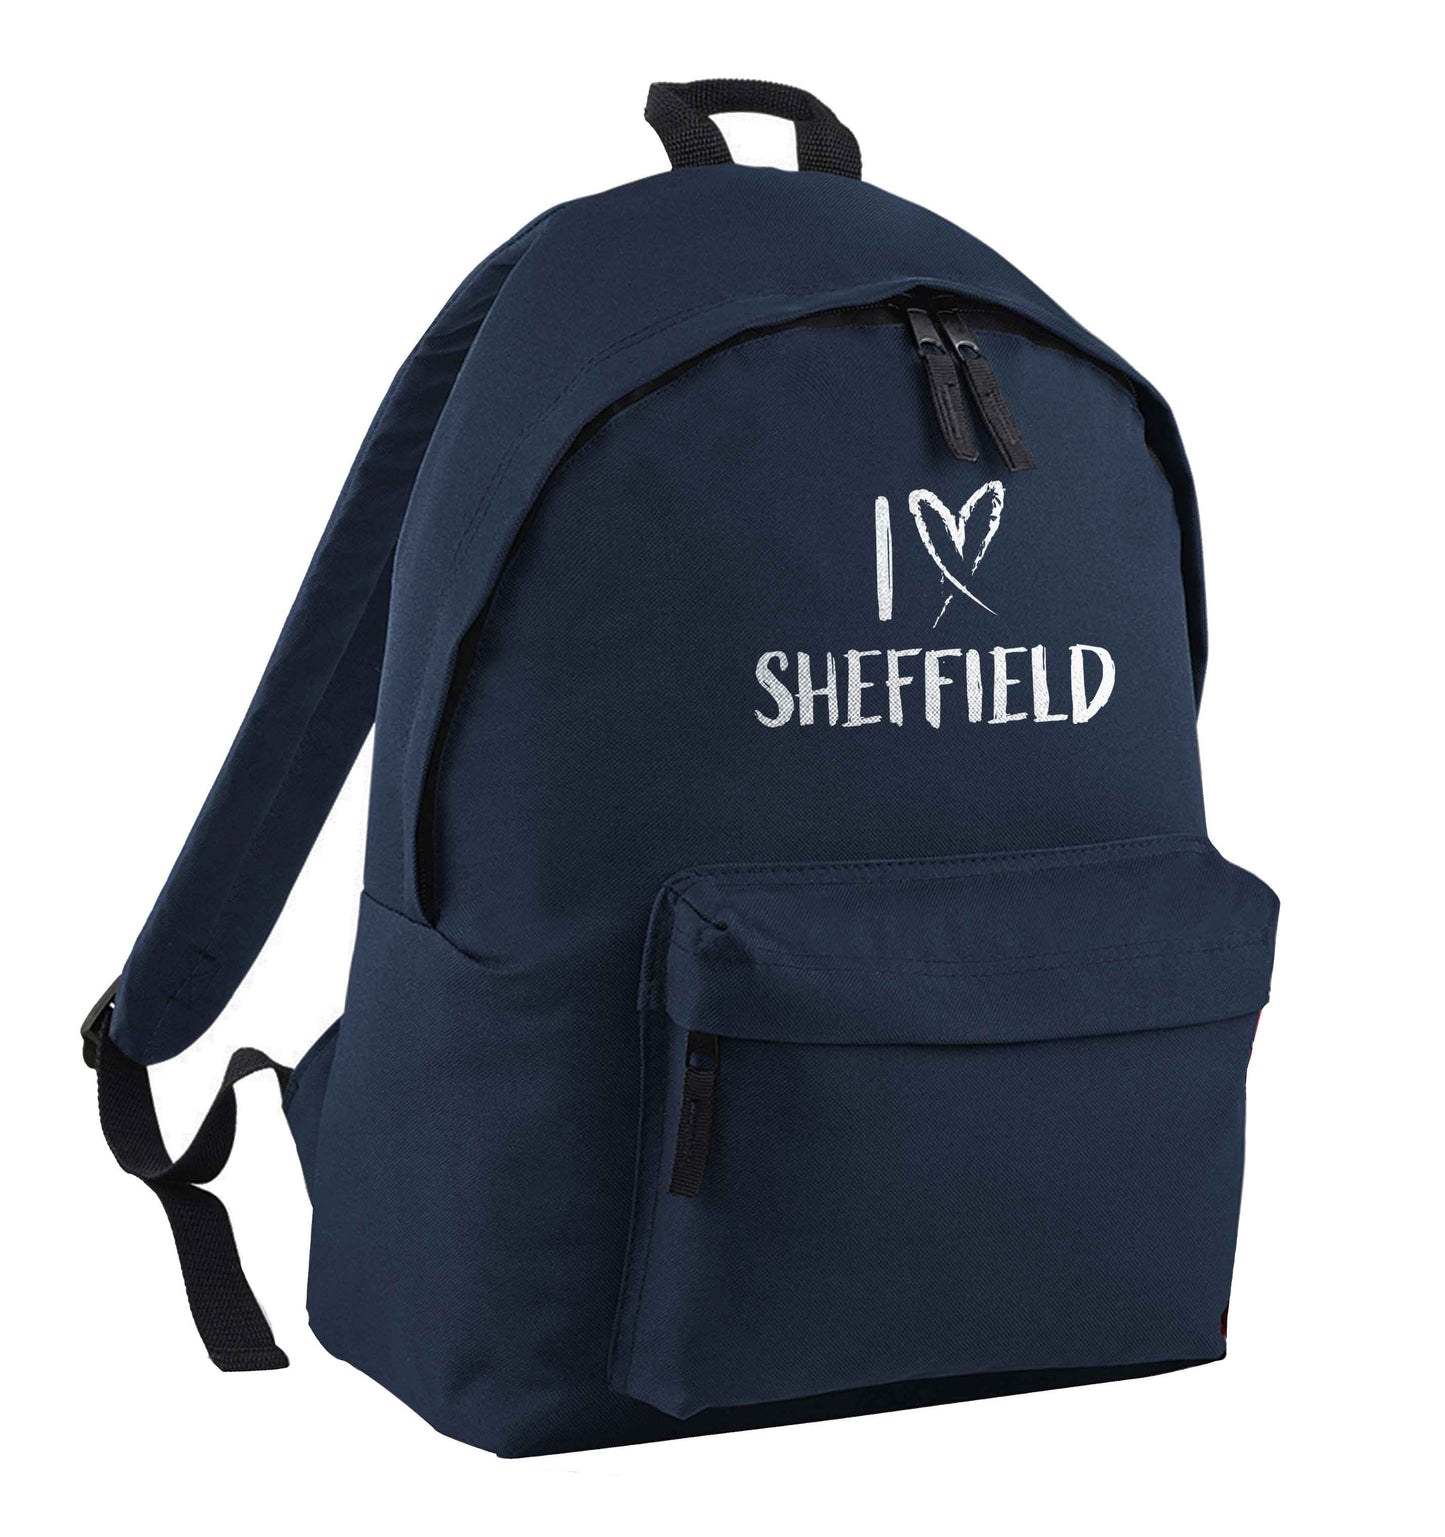 I love Sheffield navy adults backpack